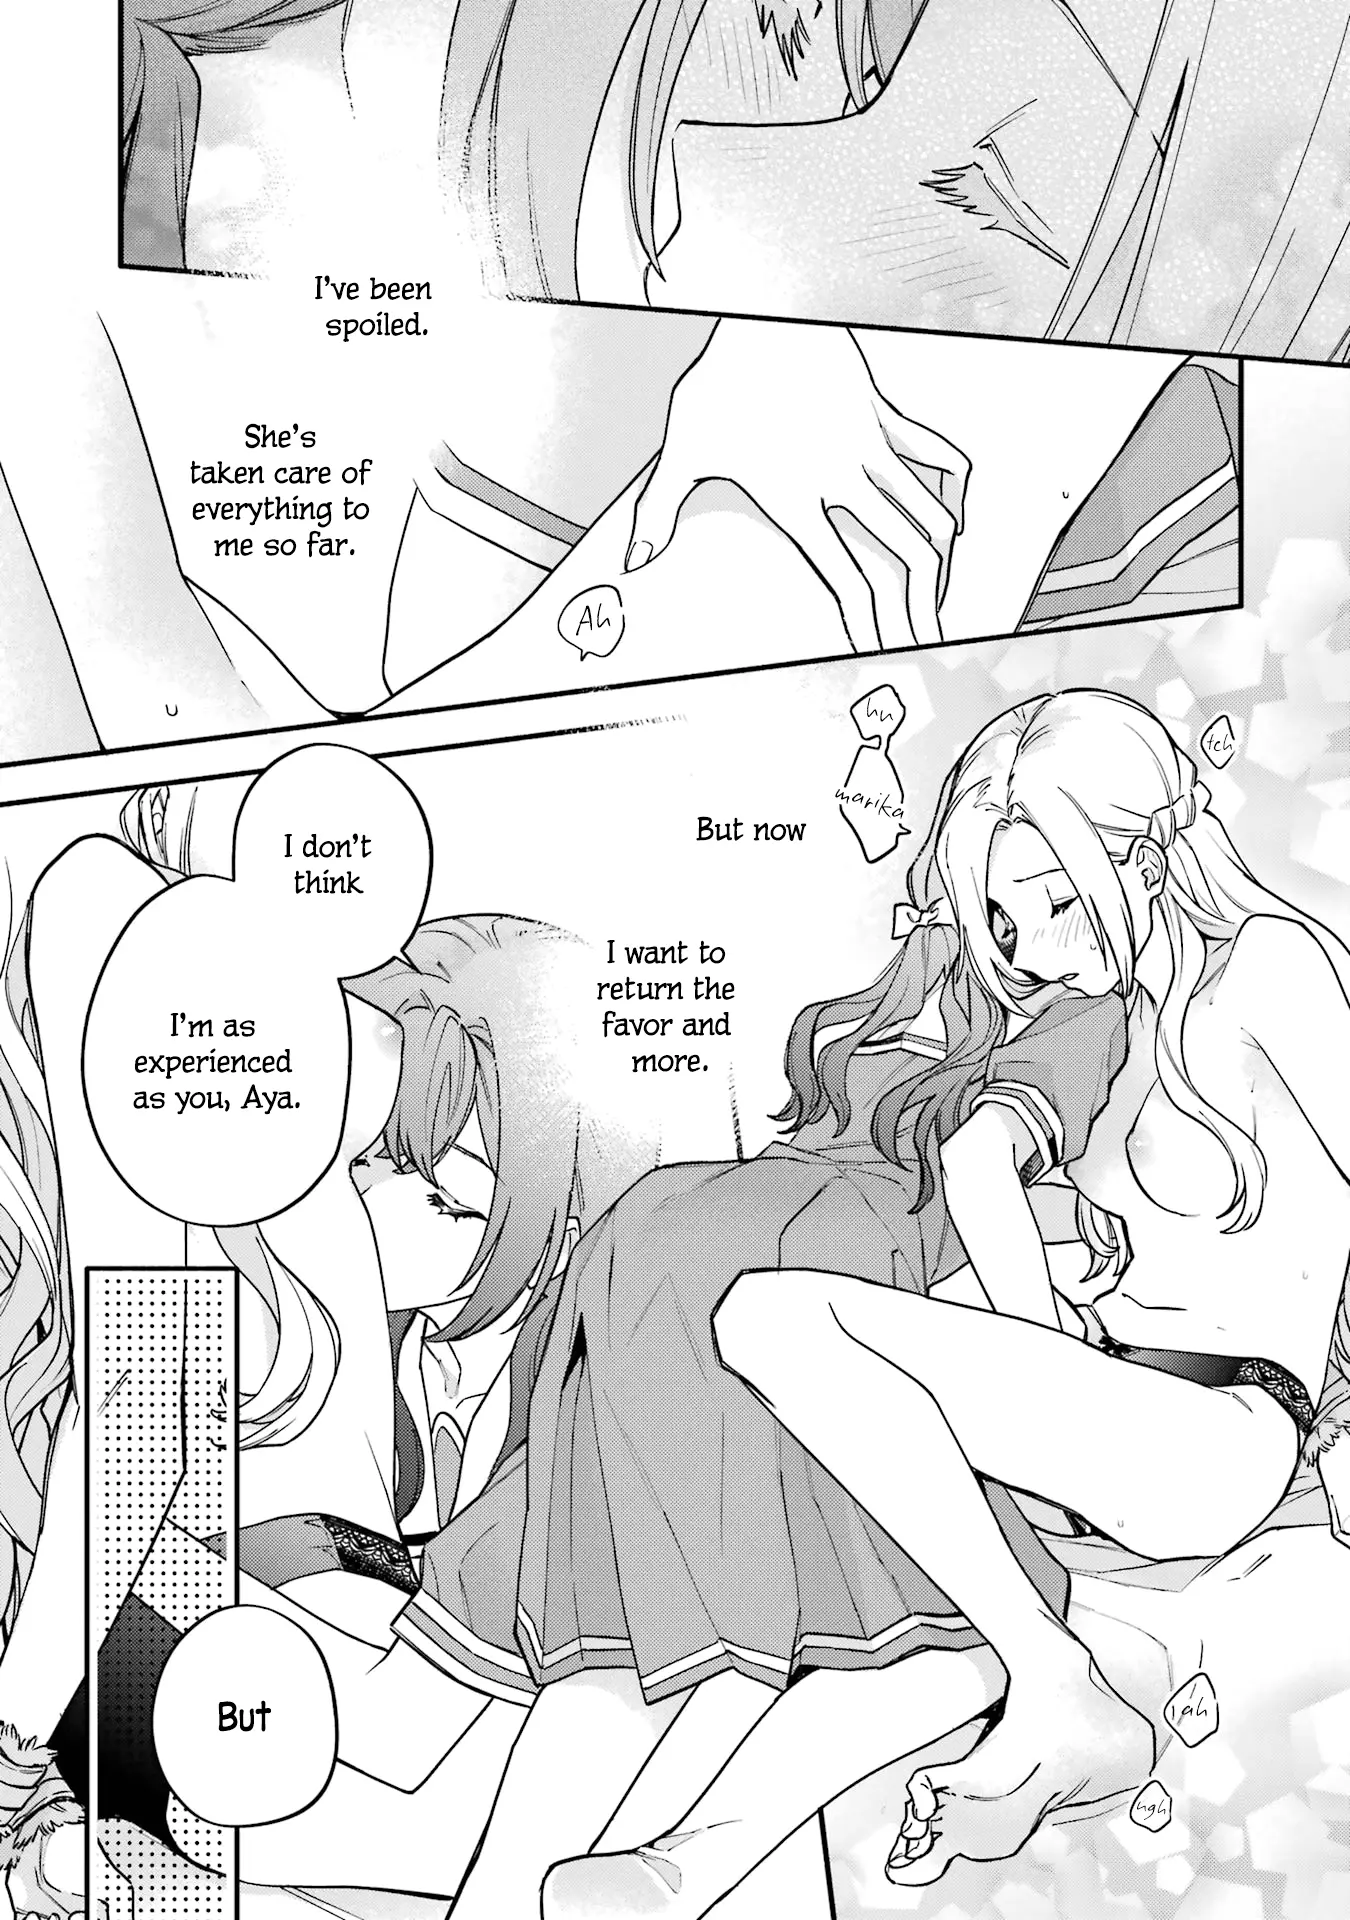 A Yuri Story About A Girl Who Insists "it's Impossible For Two Girls To Get Together" Completely Falling Within 100 Days - 15 page 29-a3f80411